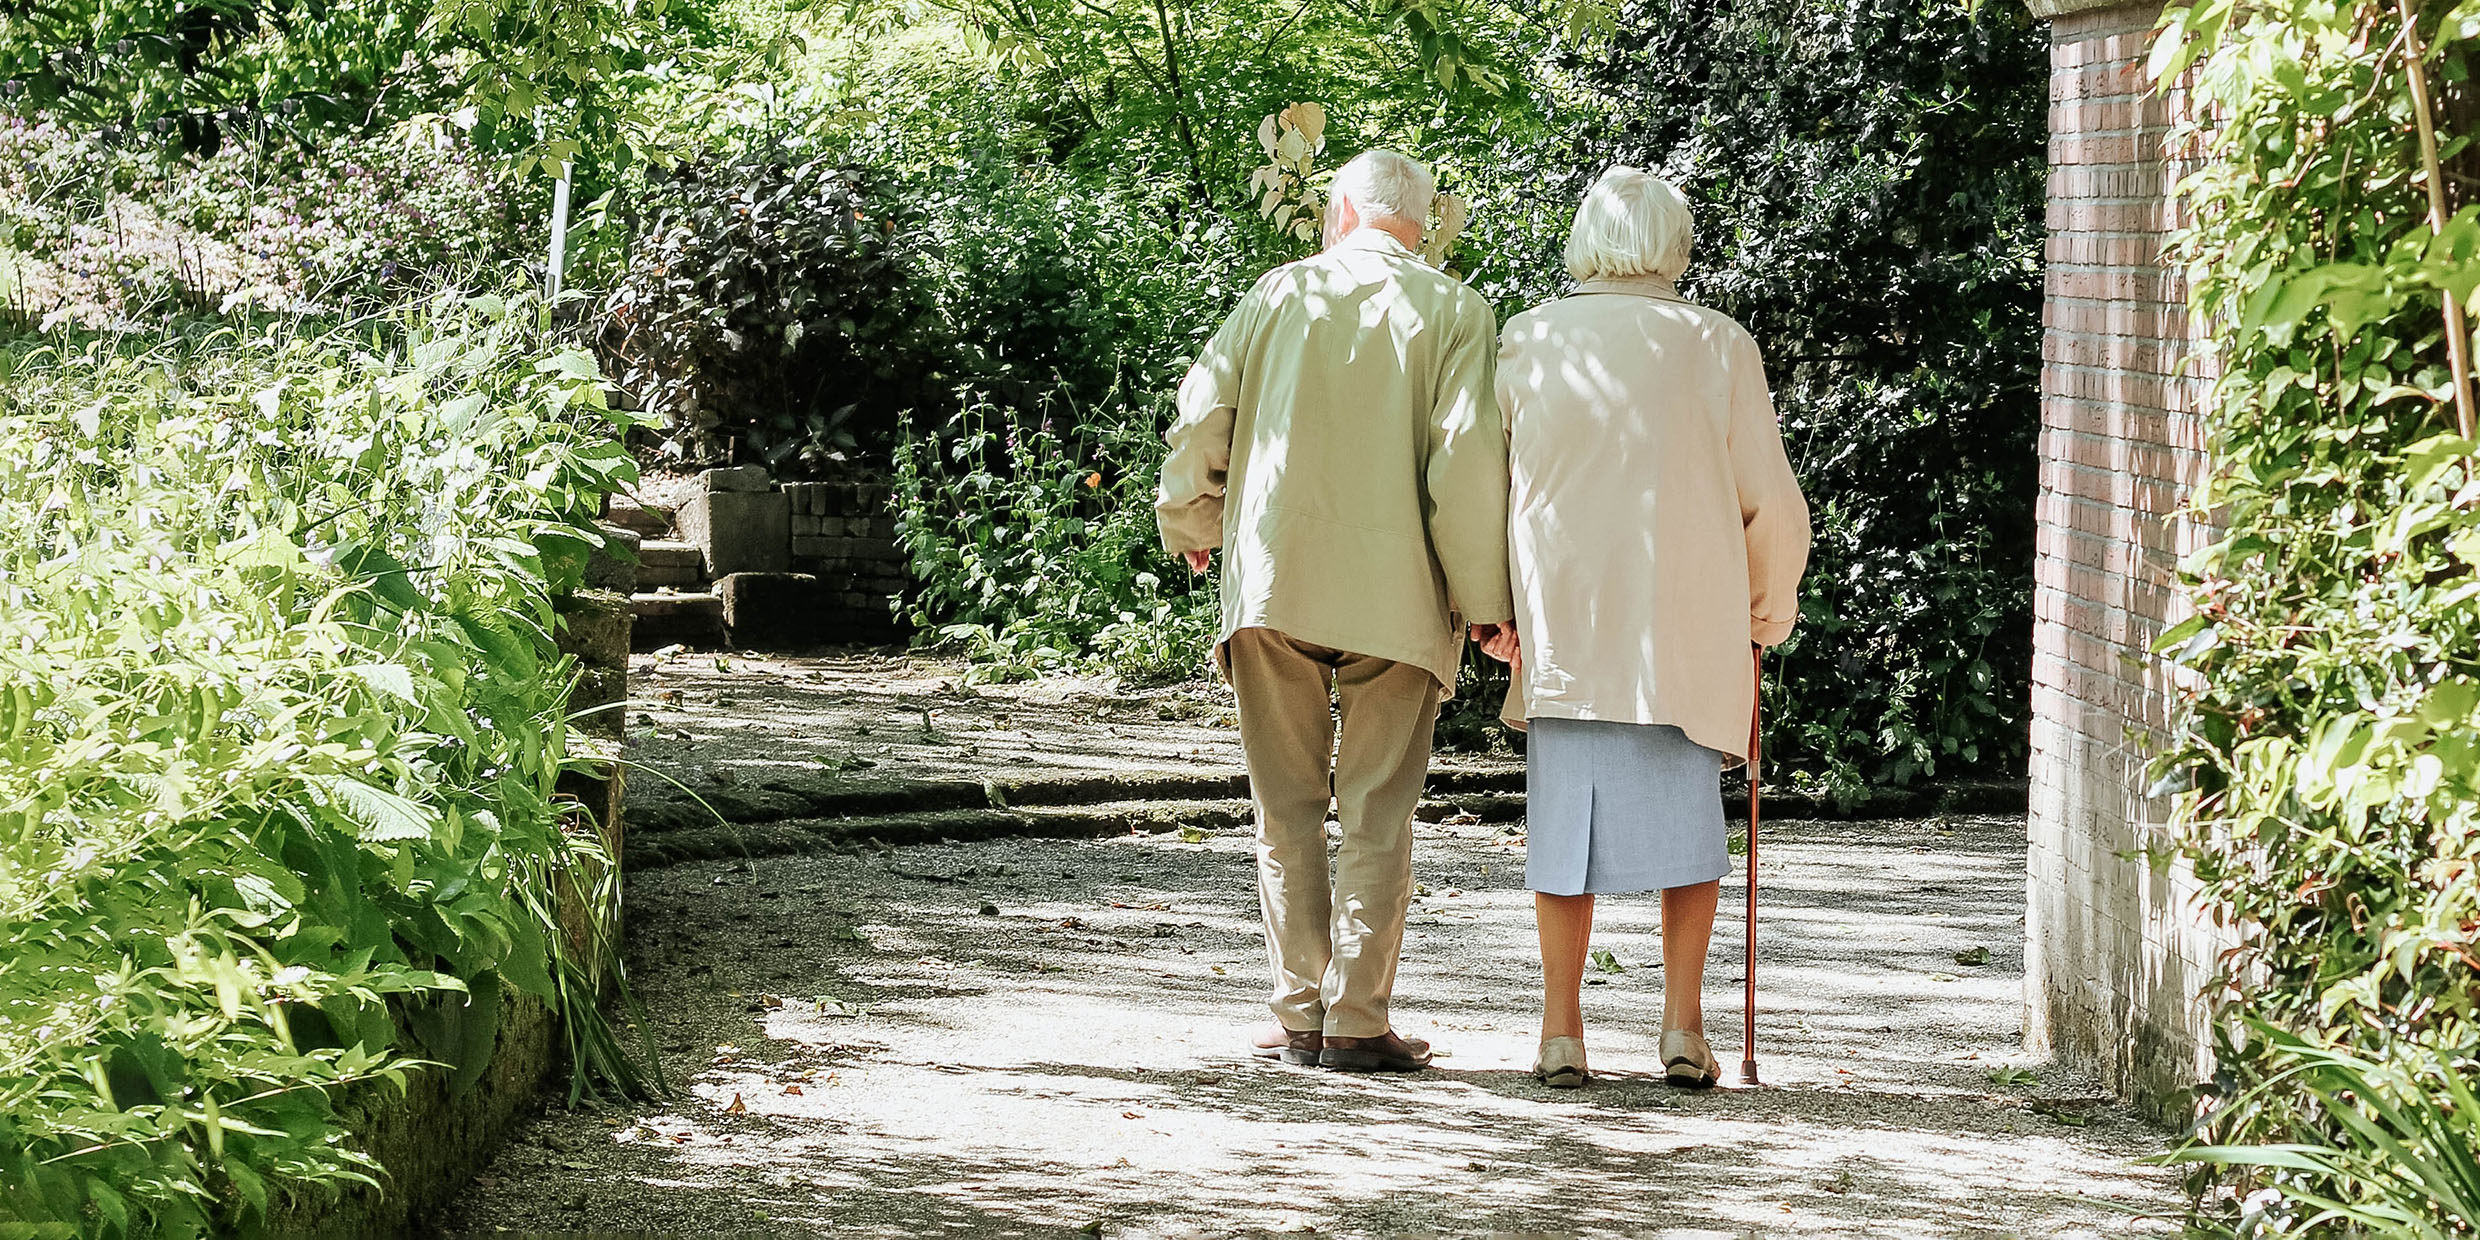 Photo of an elderly couple walking together